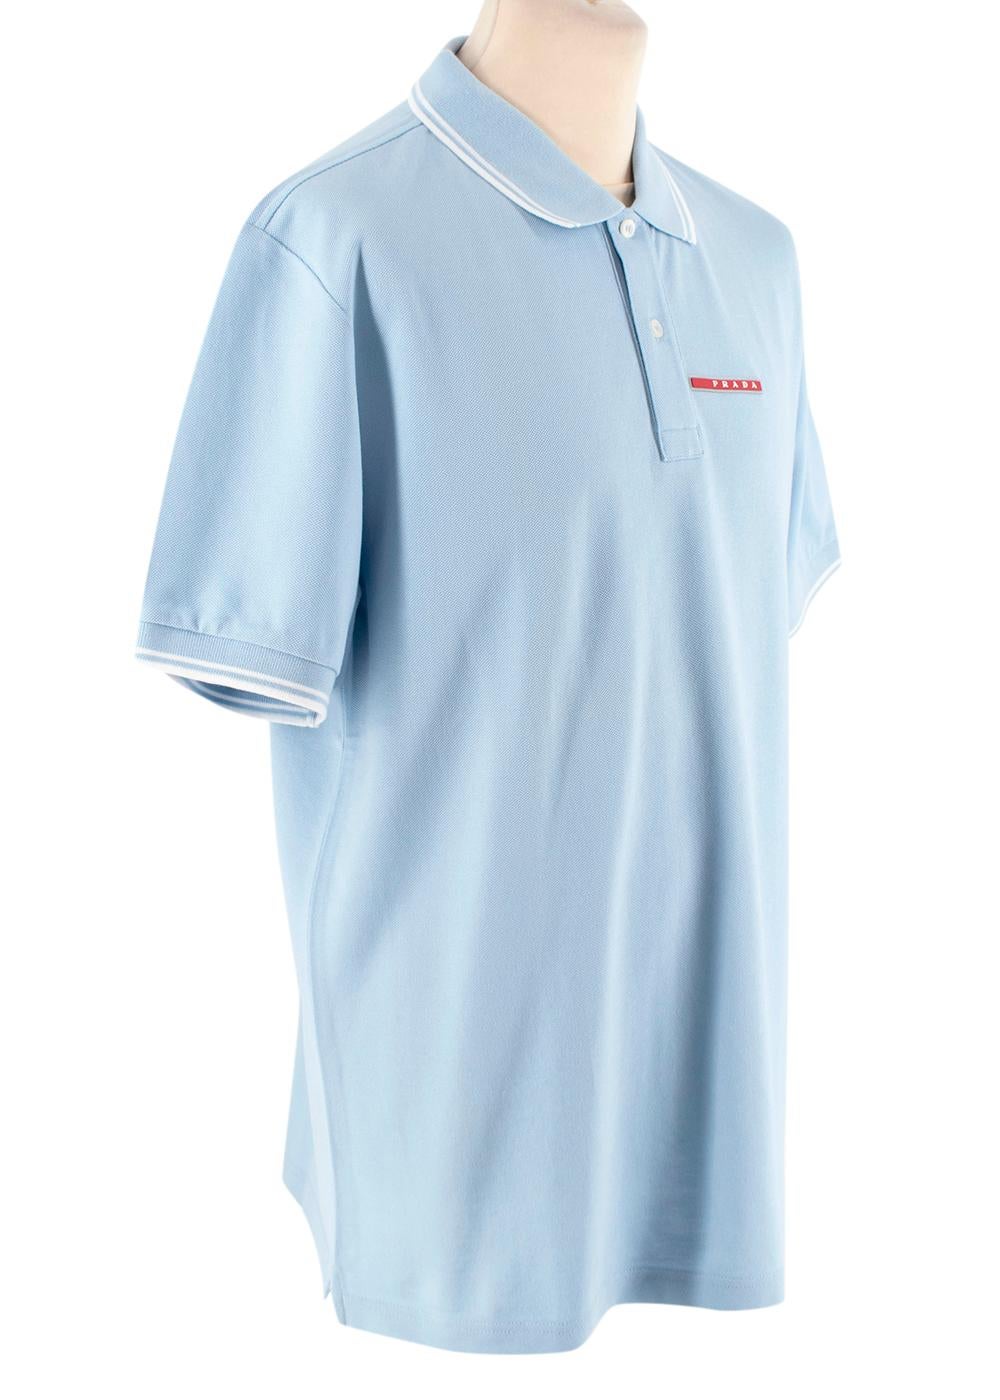 Prada Baby Blue Short Sleeve Polo Shirt
 

 - Baby blue cotton short sleeve polo shirt
 - Double white colour trim detail to the pointed collar, and cuffs
 - Signature Prada red bar logo on the chest
 - Two button closure
 

 Materials 
 100% Cotton